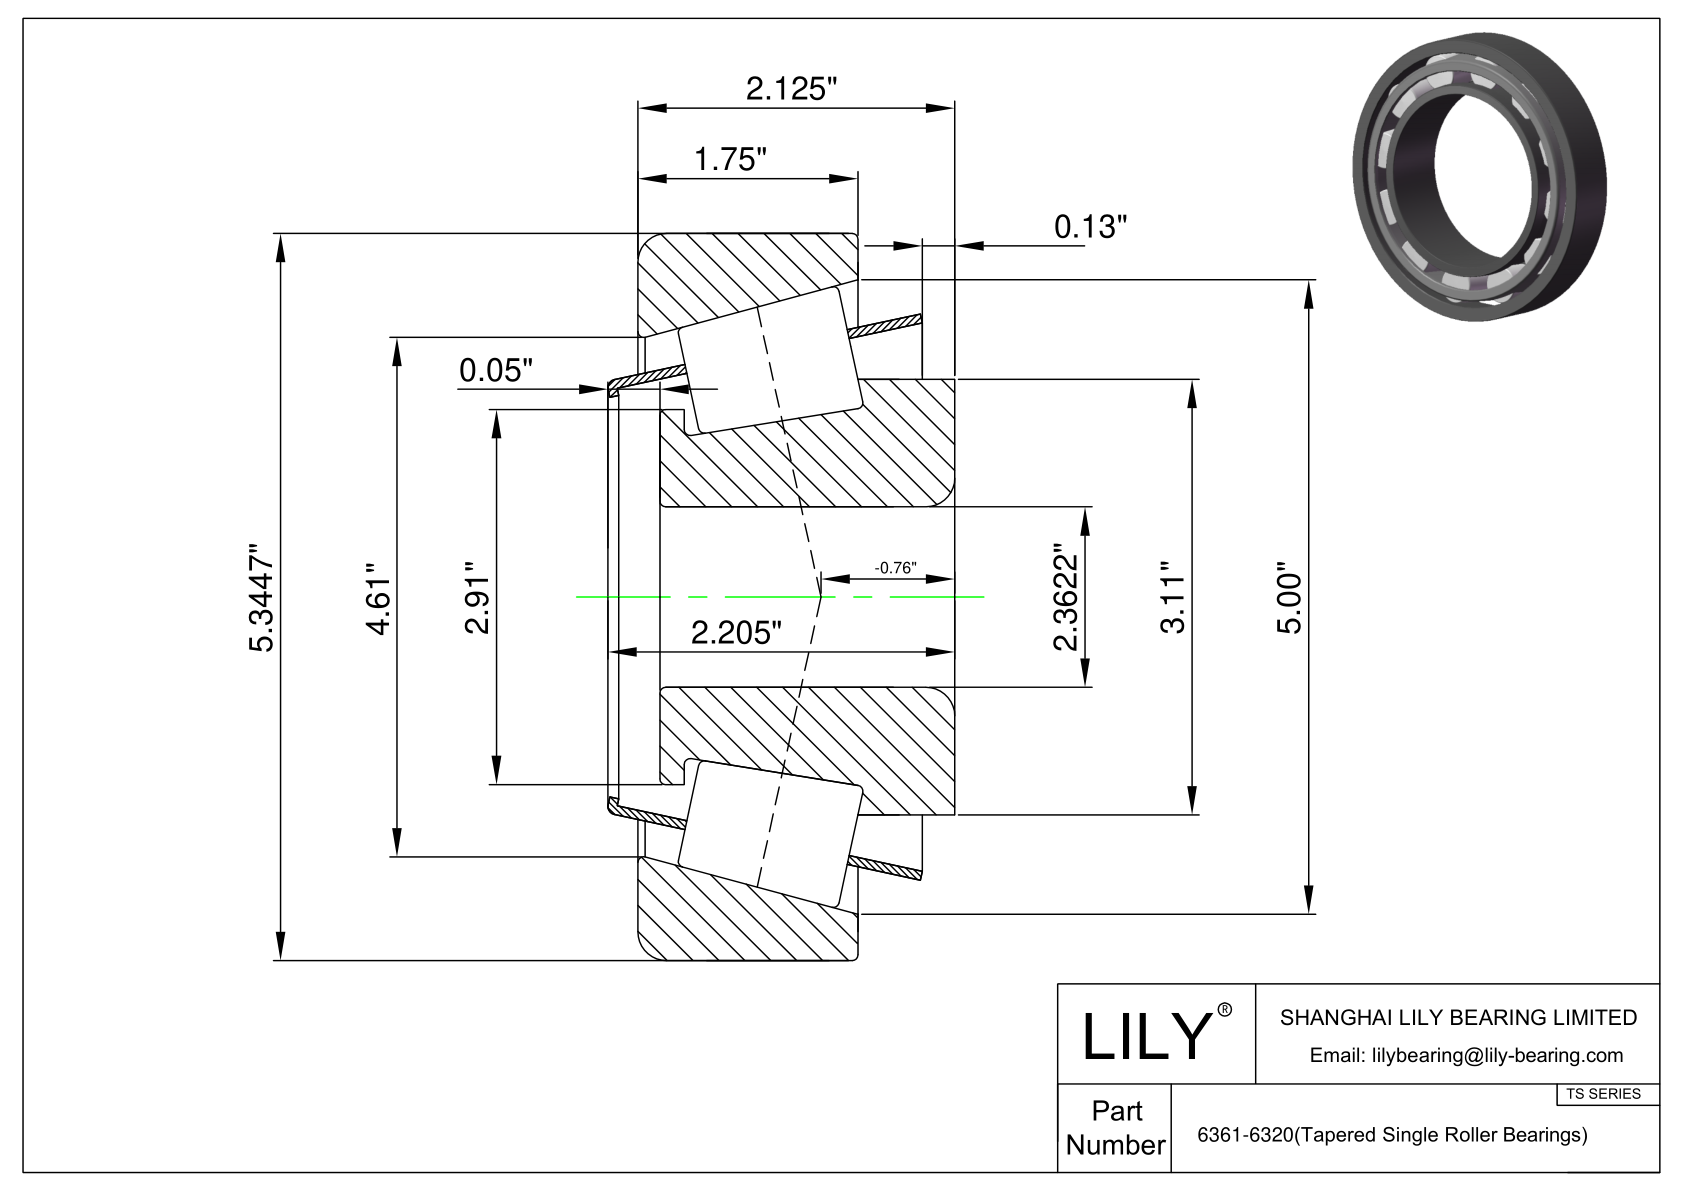 6361-6320 TS (Tapered Single Roller Bearings) (Imperial) cad drawing